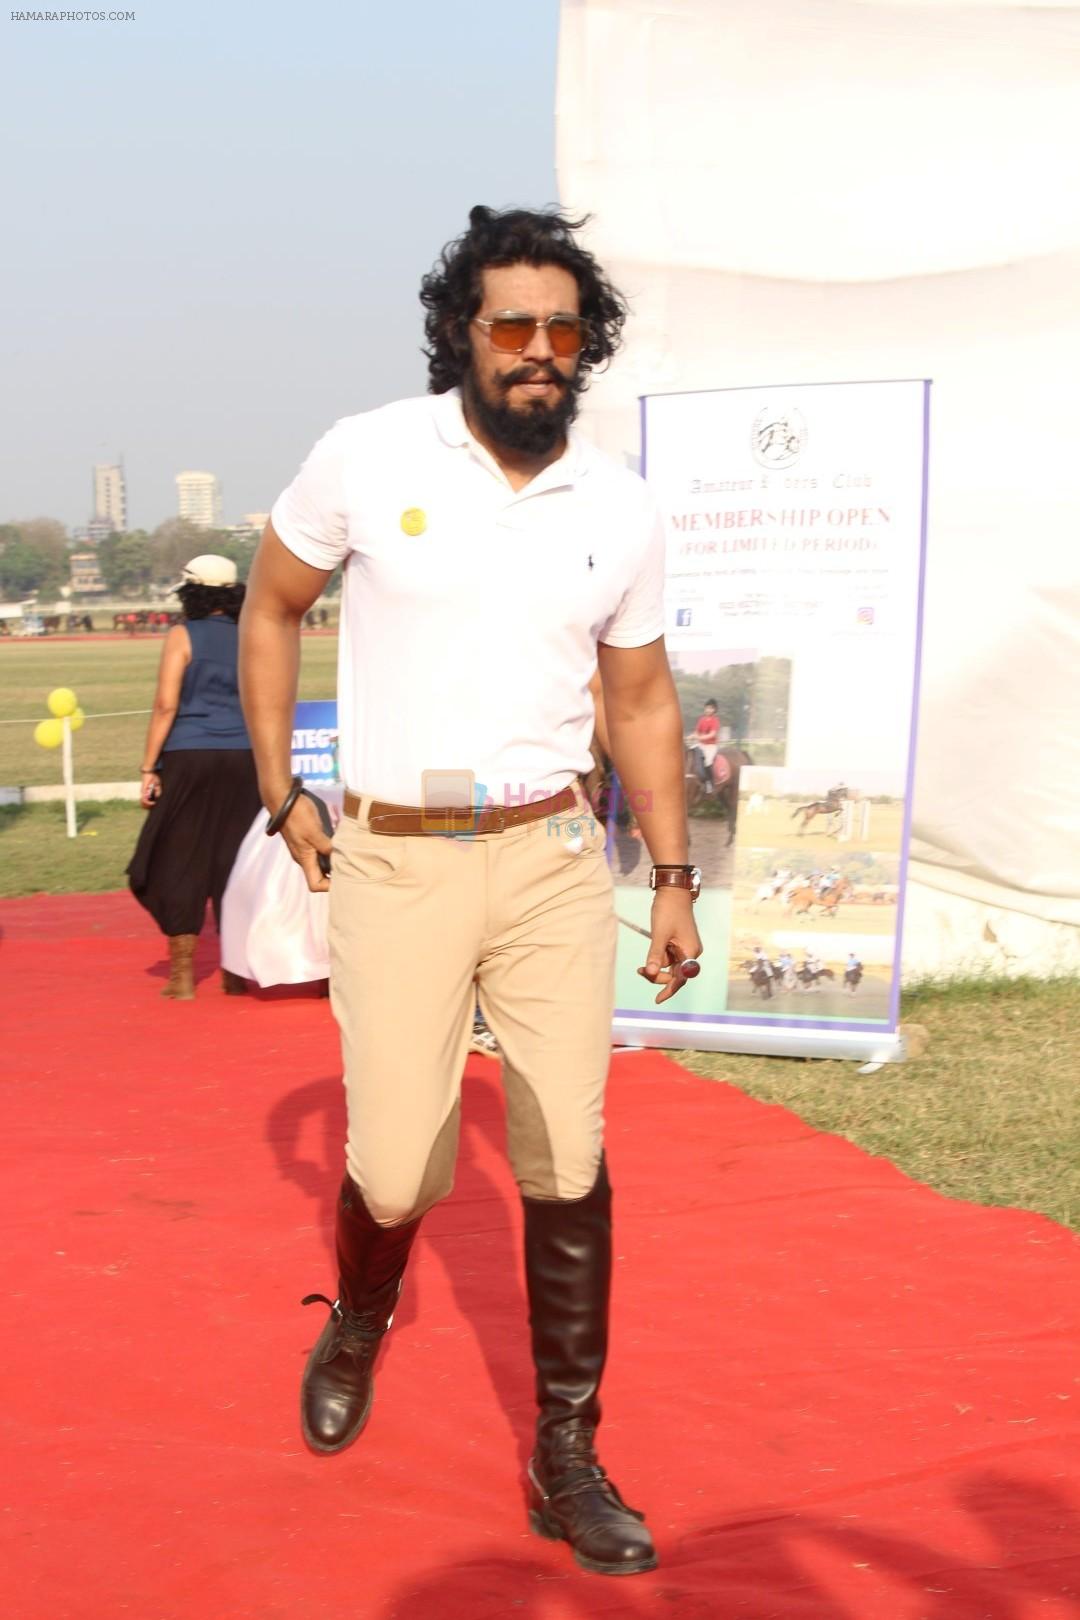 Randeep Hooda Is Show Jumping At Race Cource on 24th March 2017